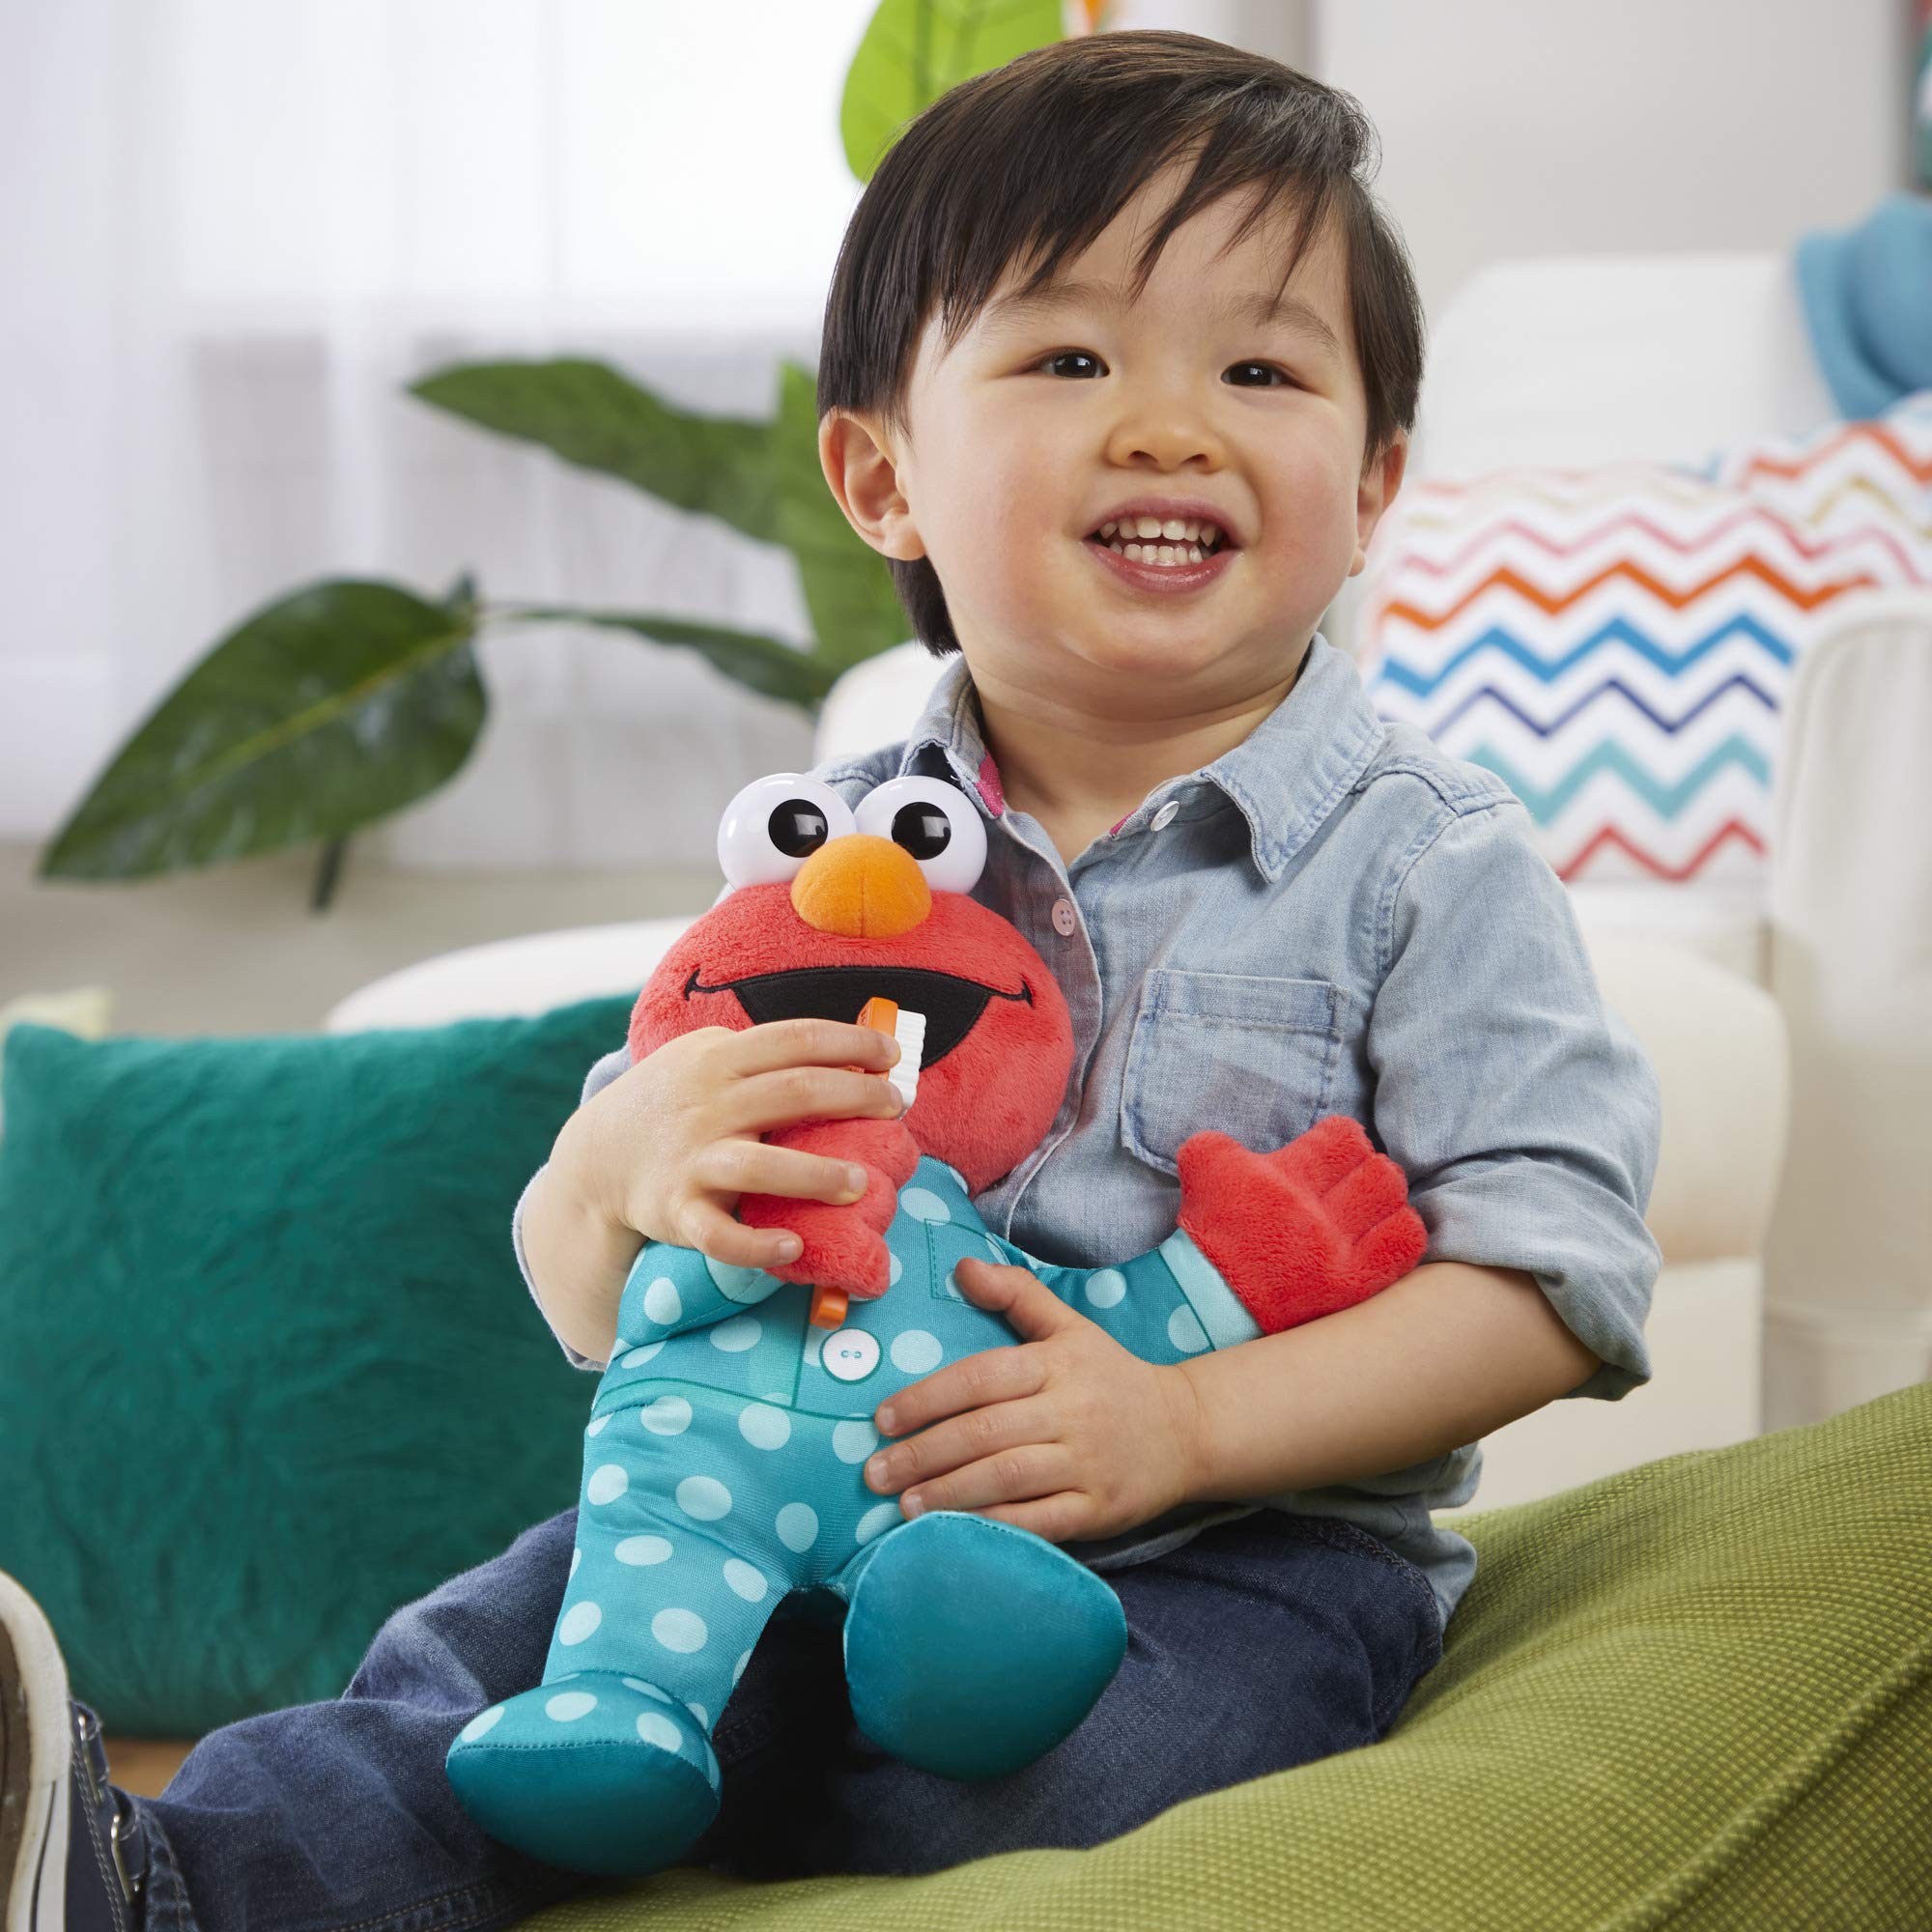 Sesame Street Elmo 12-inch Plush, Sings The Brushy Brush Song, Toy for Kids Ages 18 Months and Up